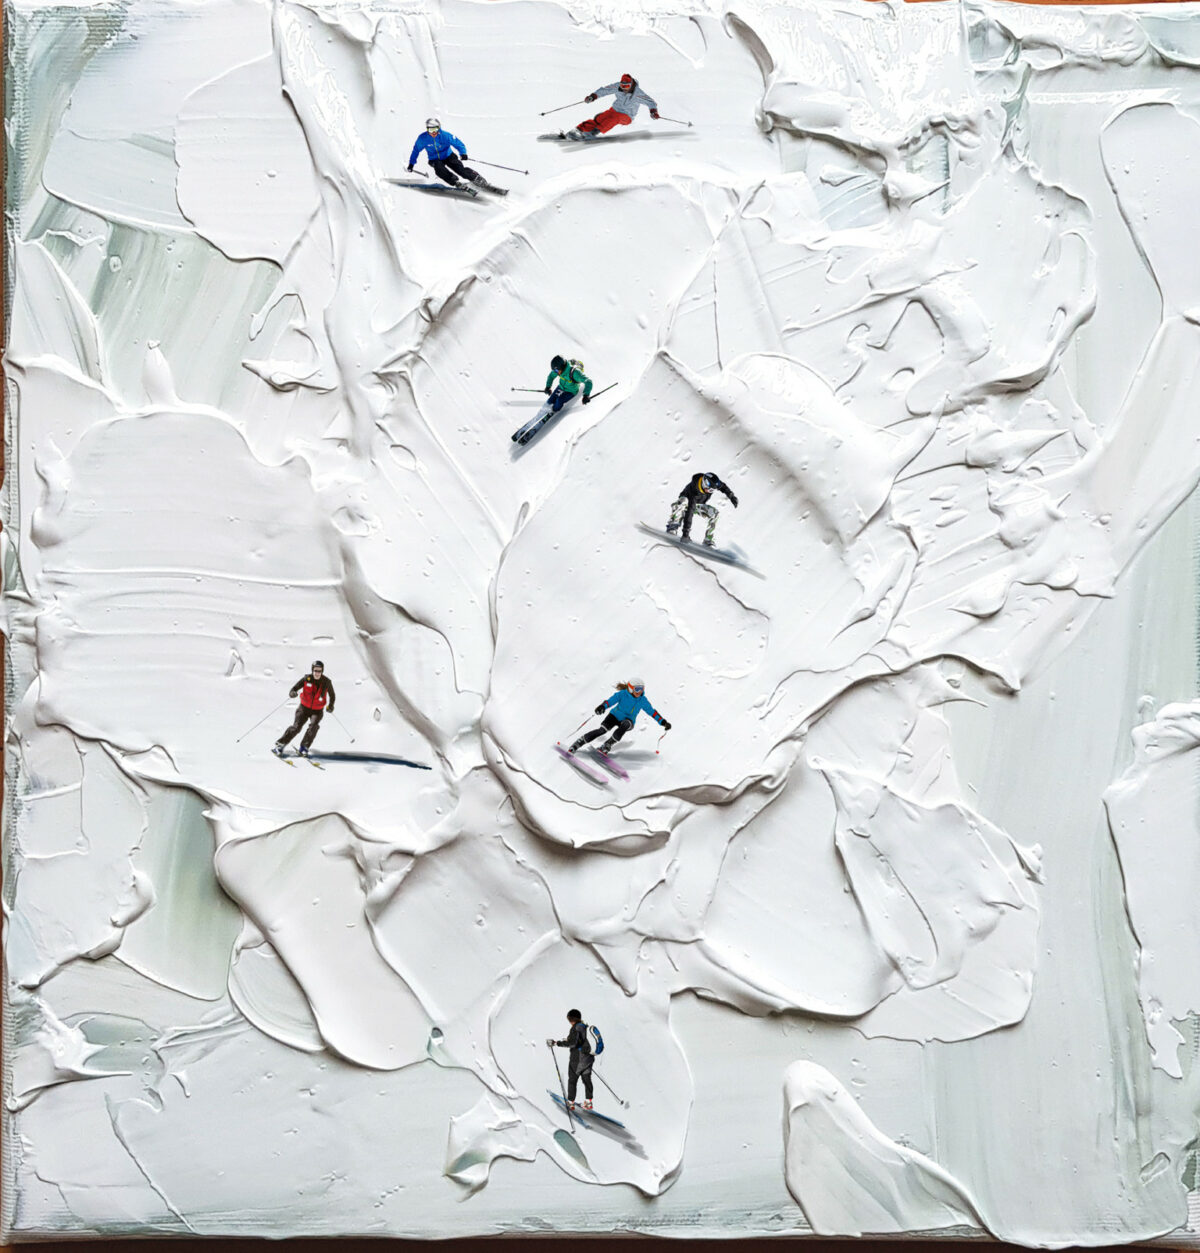 Miniature Figures Skiing And Swimming Through Thick Paint Blobs By Golsa Golchini 9